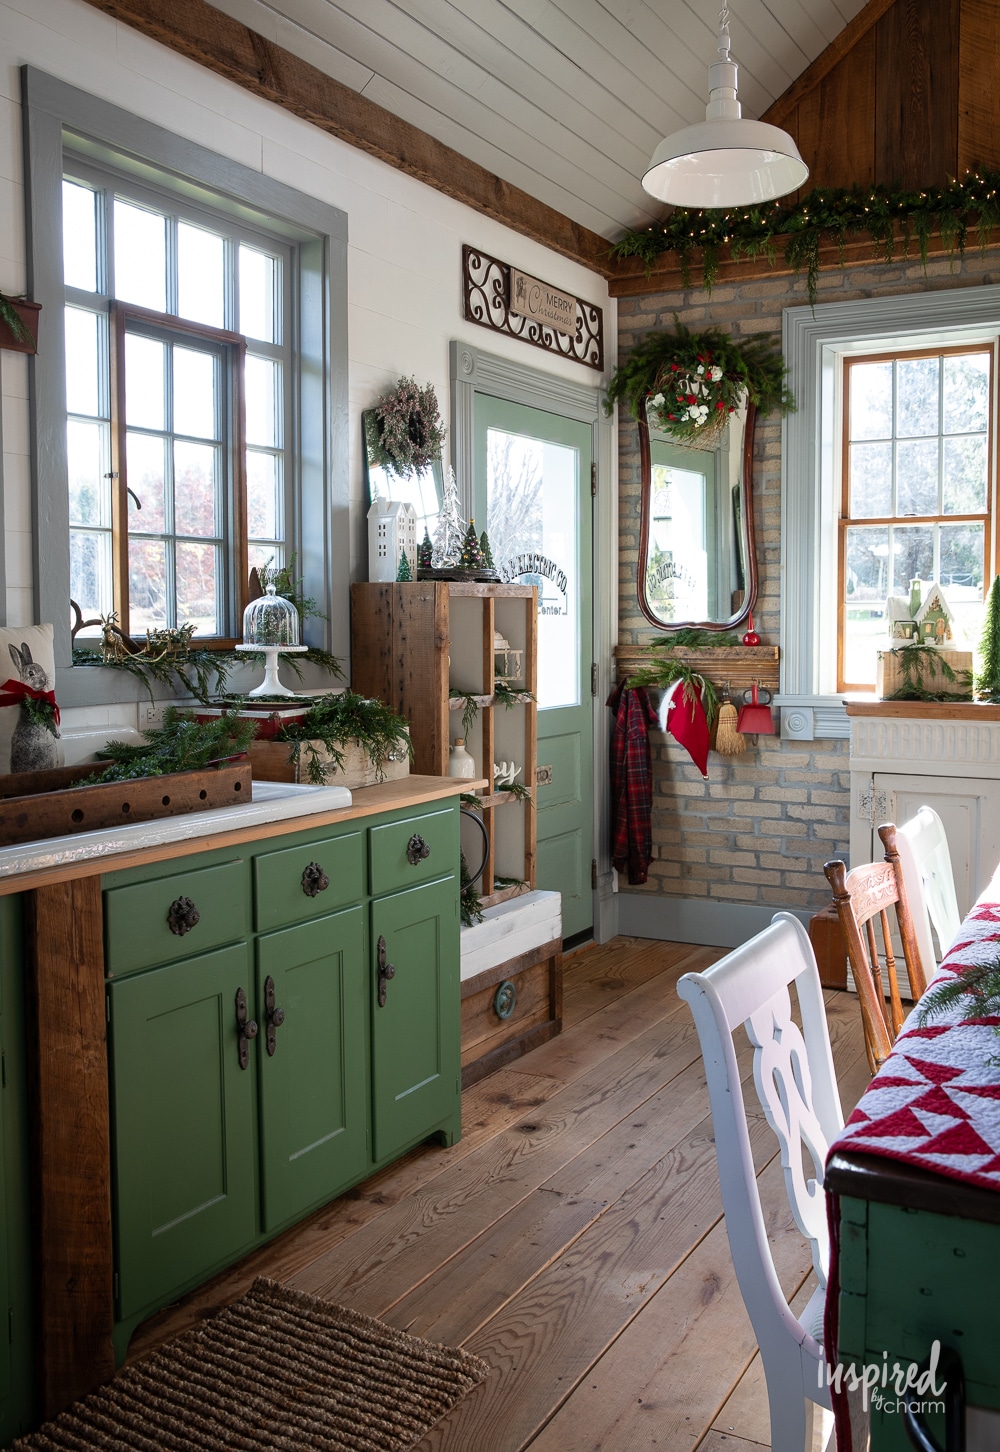 view into the garden shed with decor for christmas.